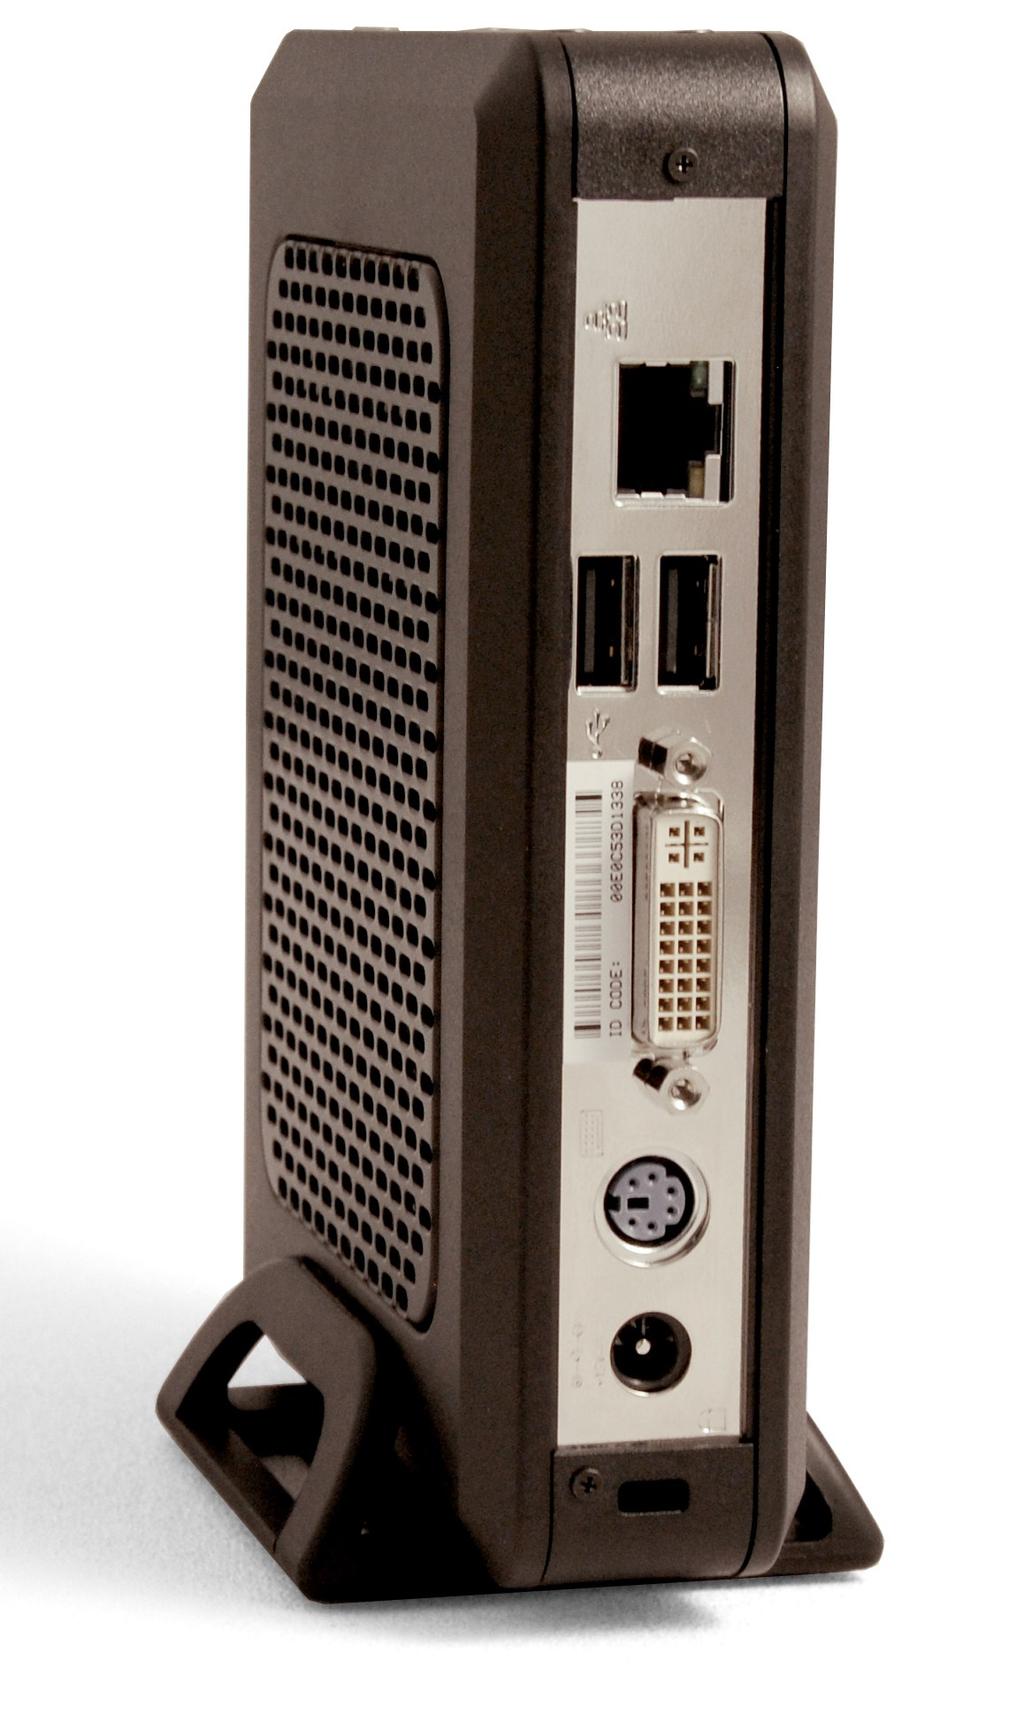 DELL OPTIPLEX TECHNICAL GUIDEBOOK 1.0 FRONT AND BACK VIEW Front Back 1 2 5 6 3 4 6 7 8 9 10 Number Name Number Name 1 Power Button 6 USB 2.